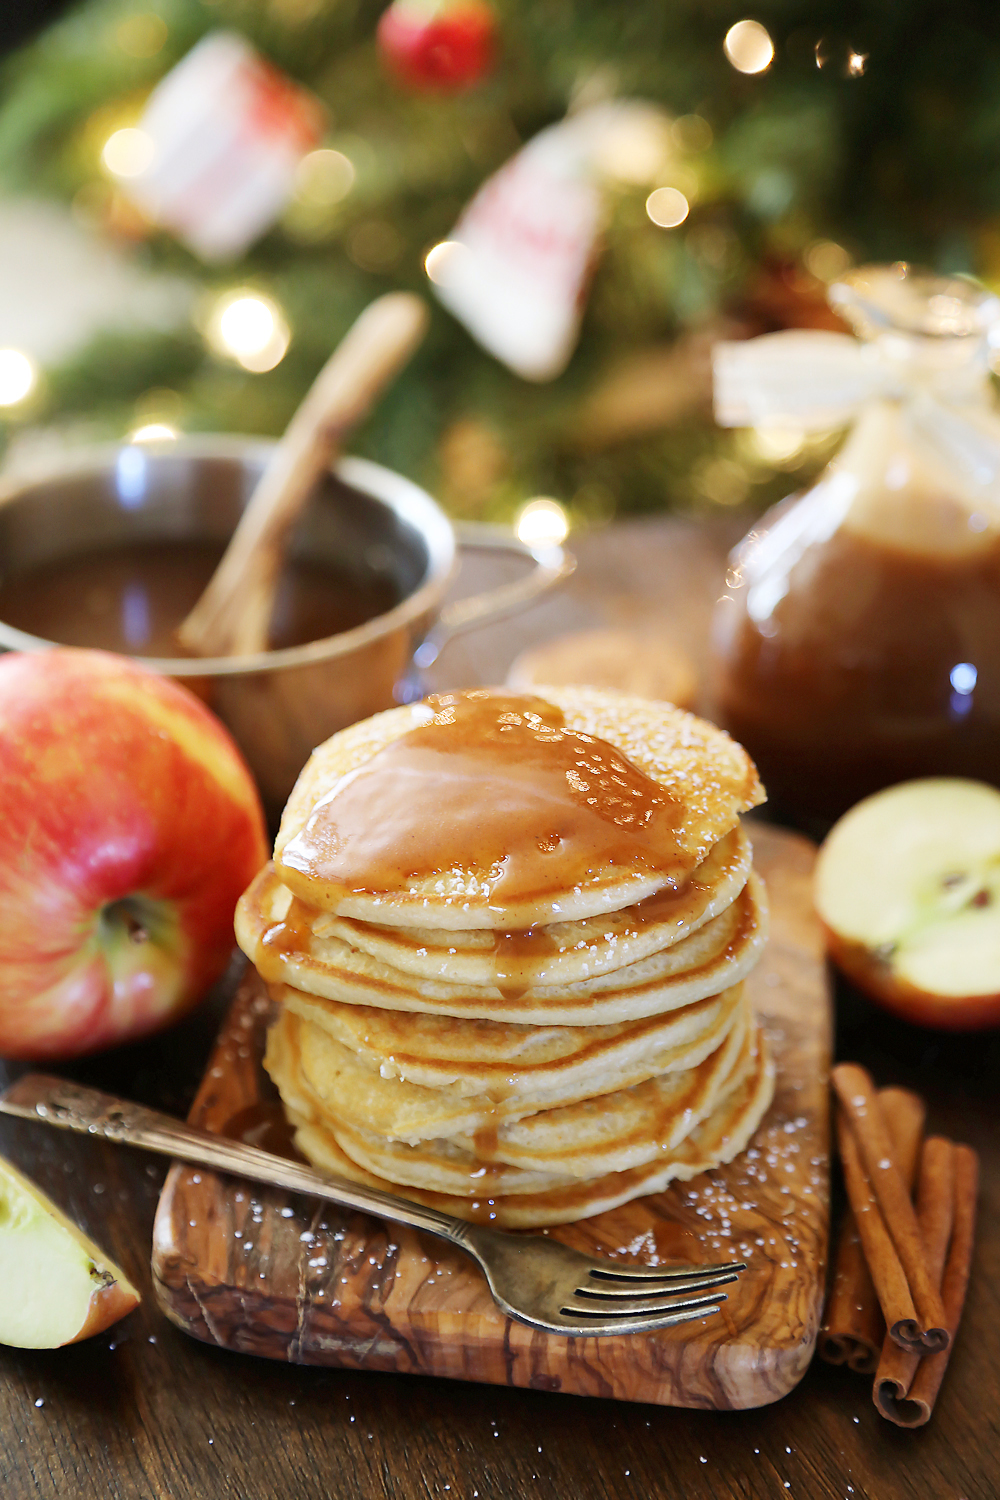 Easy Homemade Apple Cider Syrup – Velvety rich, cinnamon-spiced syrup is perfect on hot pancakes, waffles or French toast. Use in any recipe that calls for maple syrup + give as gifts! Thecomfortofcooking.com